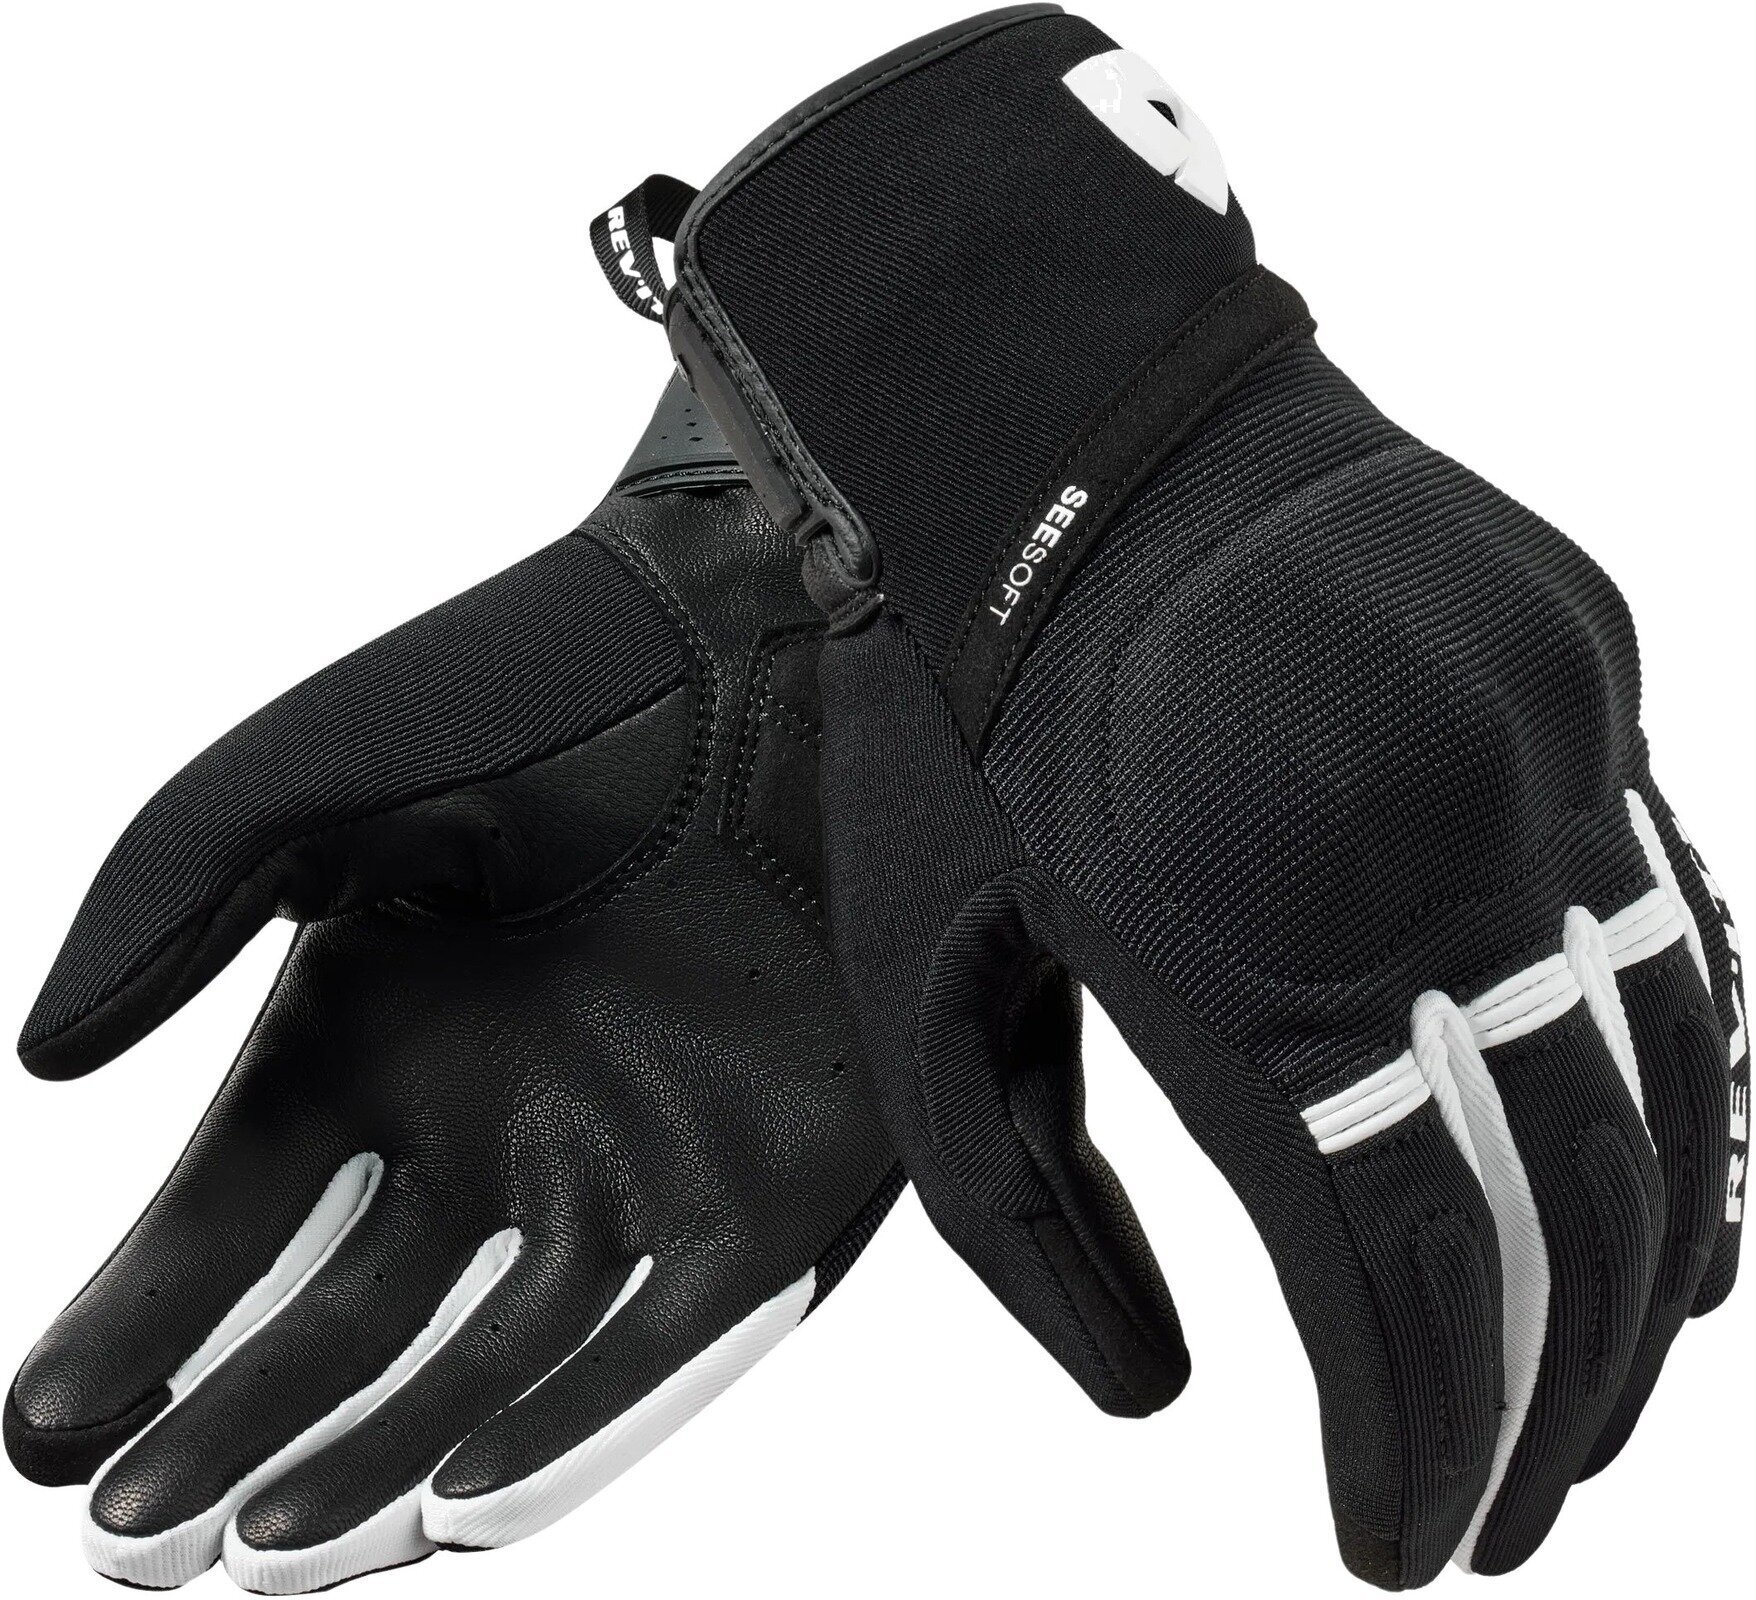 Motorcycle Gloves Rev'it! Gloves Mosca 2 Black/White XL Motorcycle Gloves